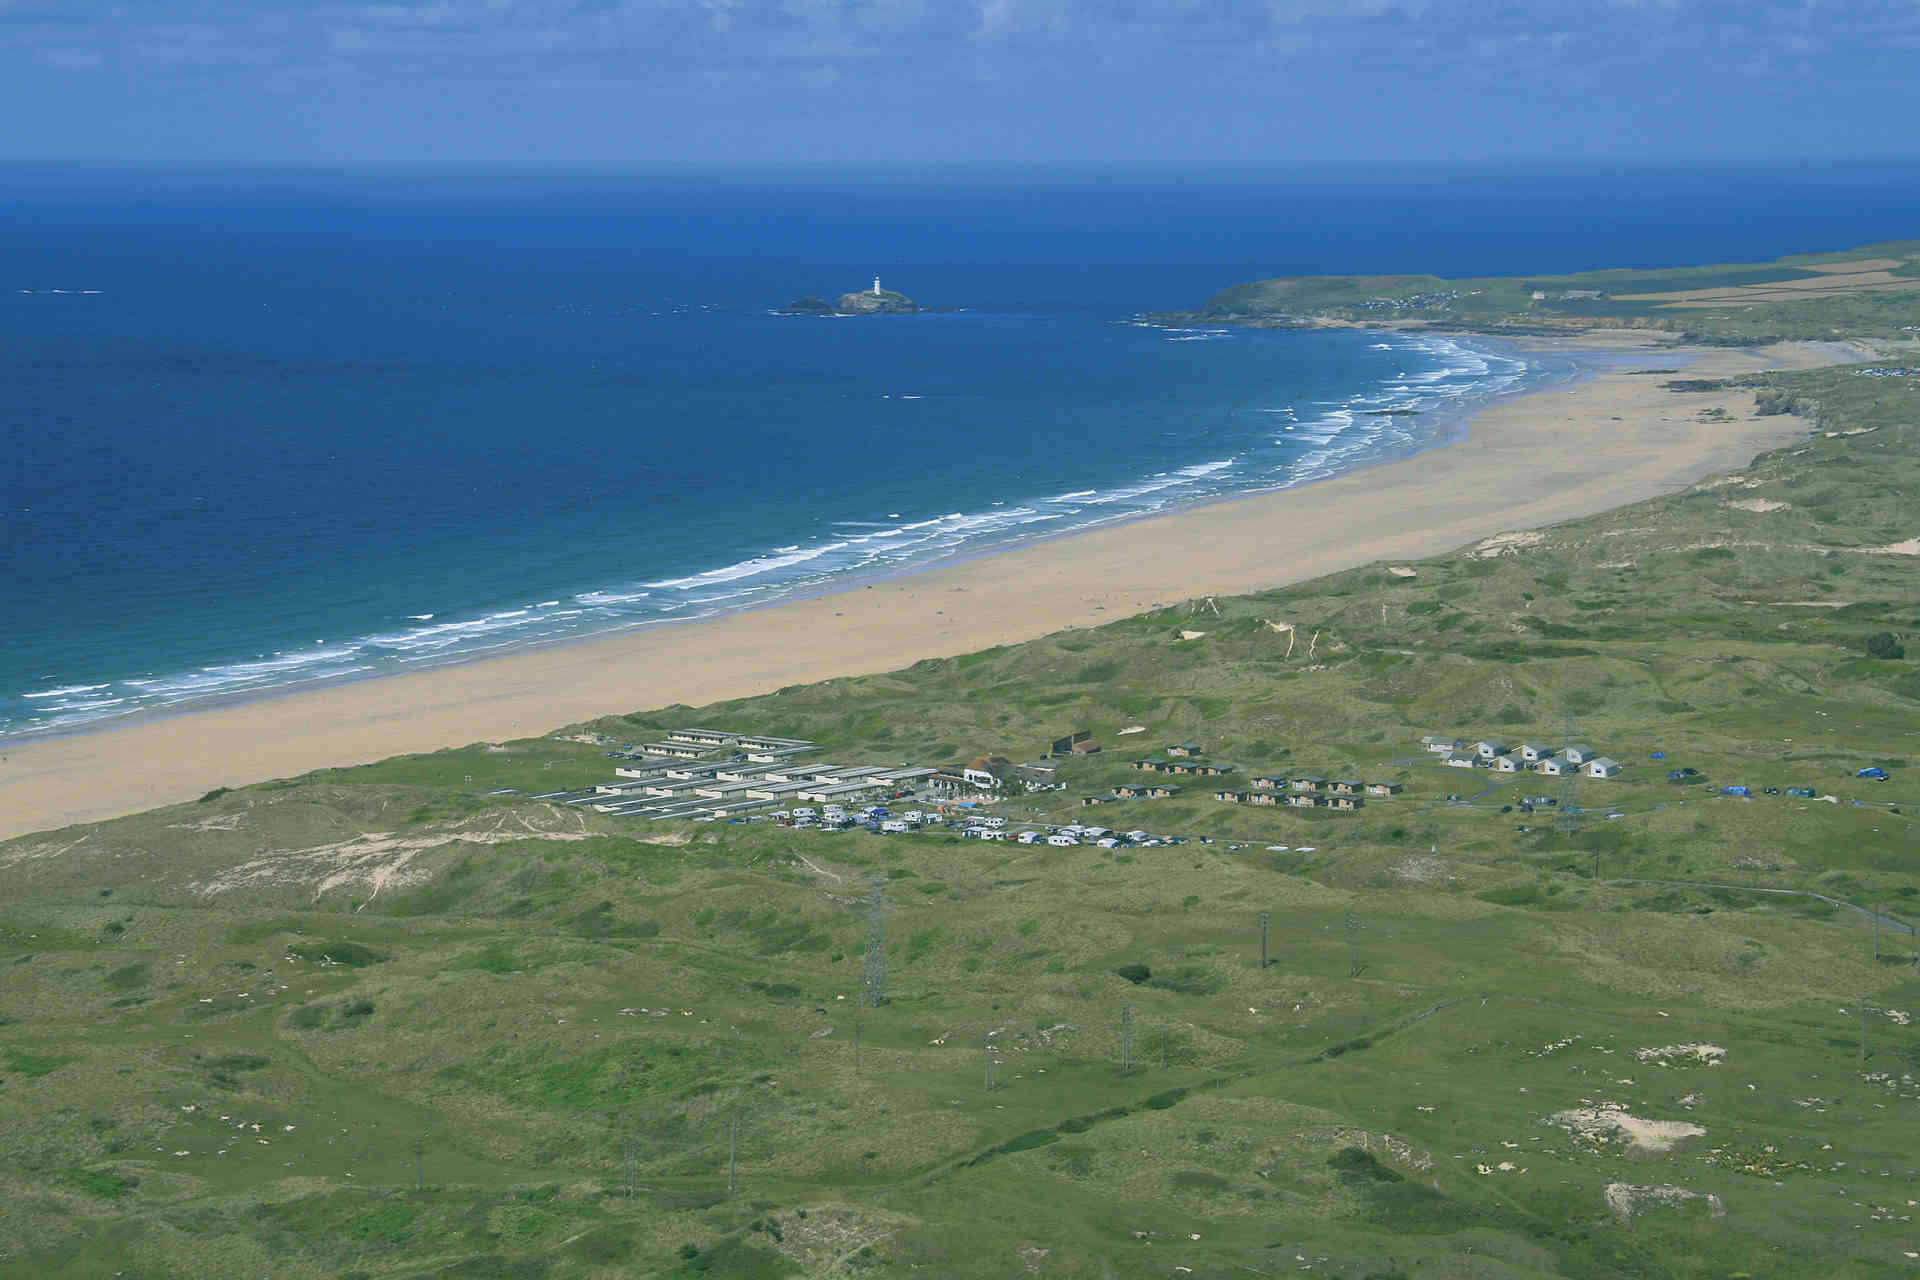 Birdeye view of Beachside Holiday Park and St Ives Bay in Cornwall